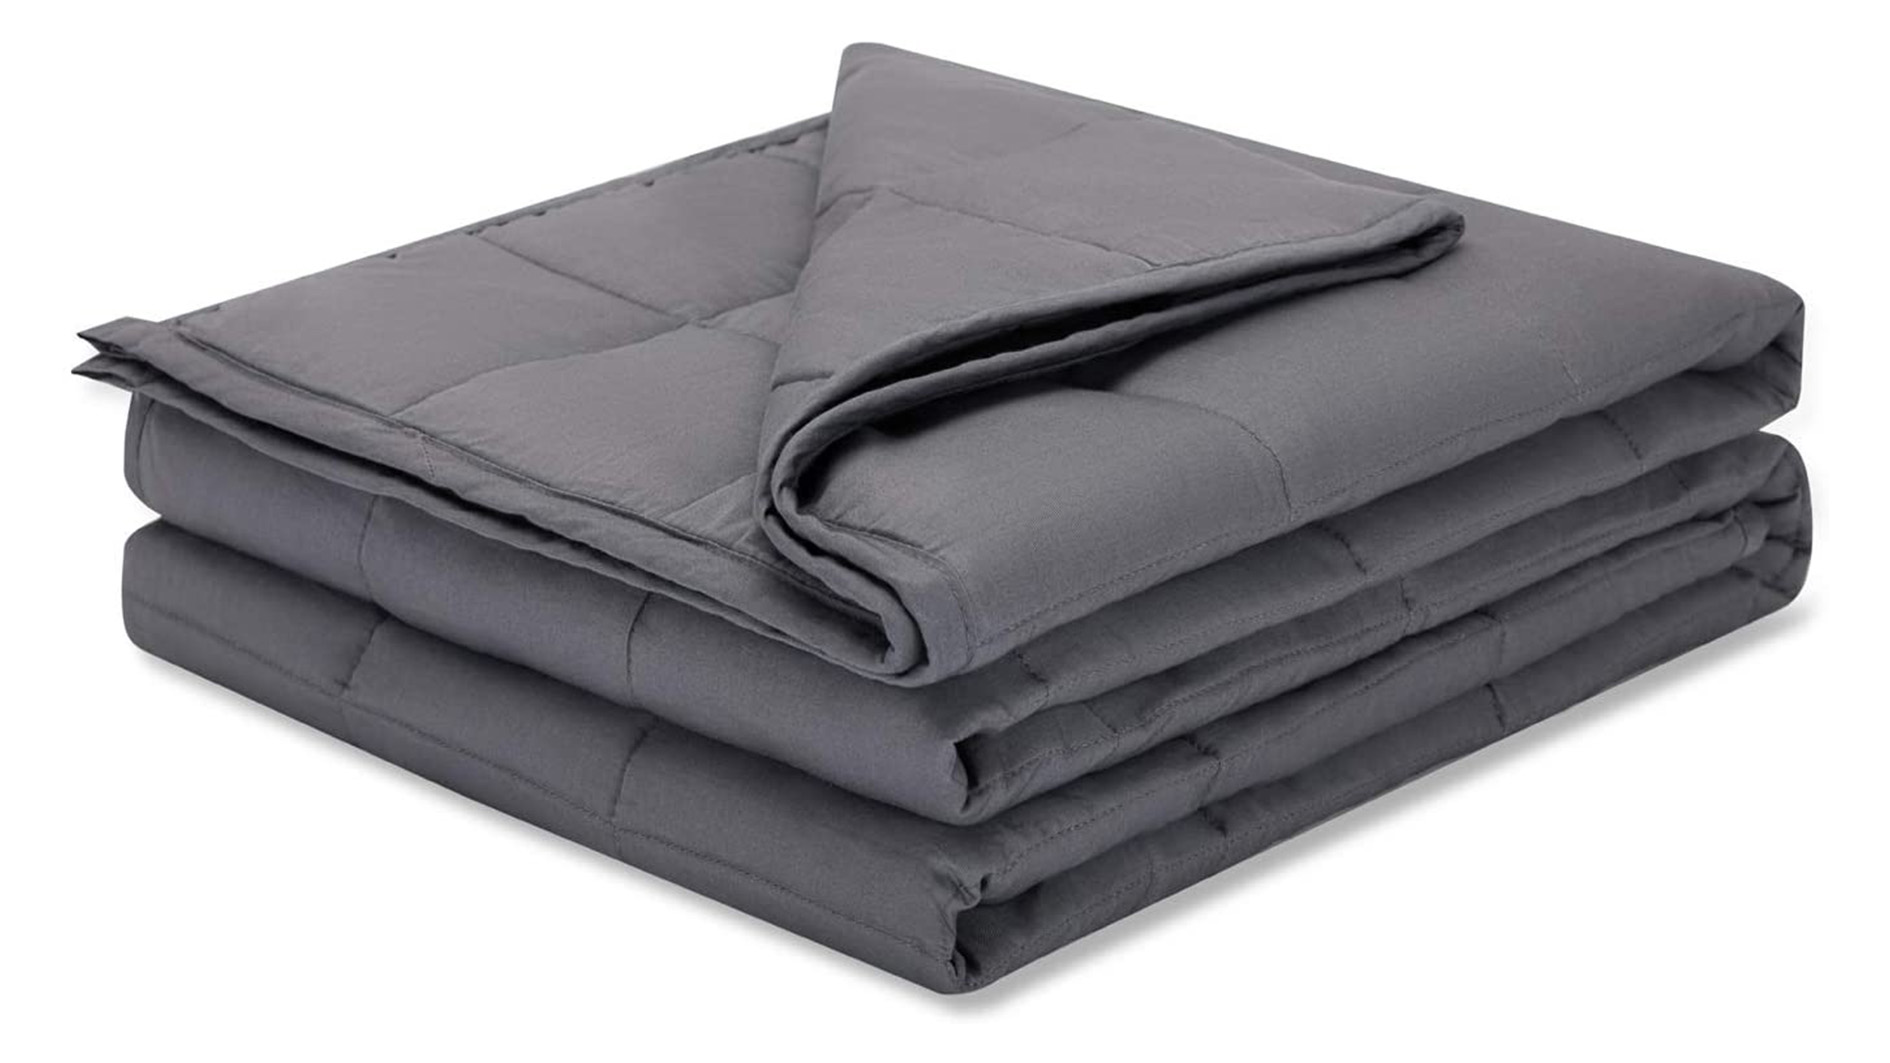 Luna Weighted Blanket review: The Luna Cotton Weighted Blanket in grey